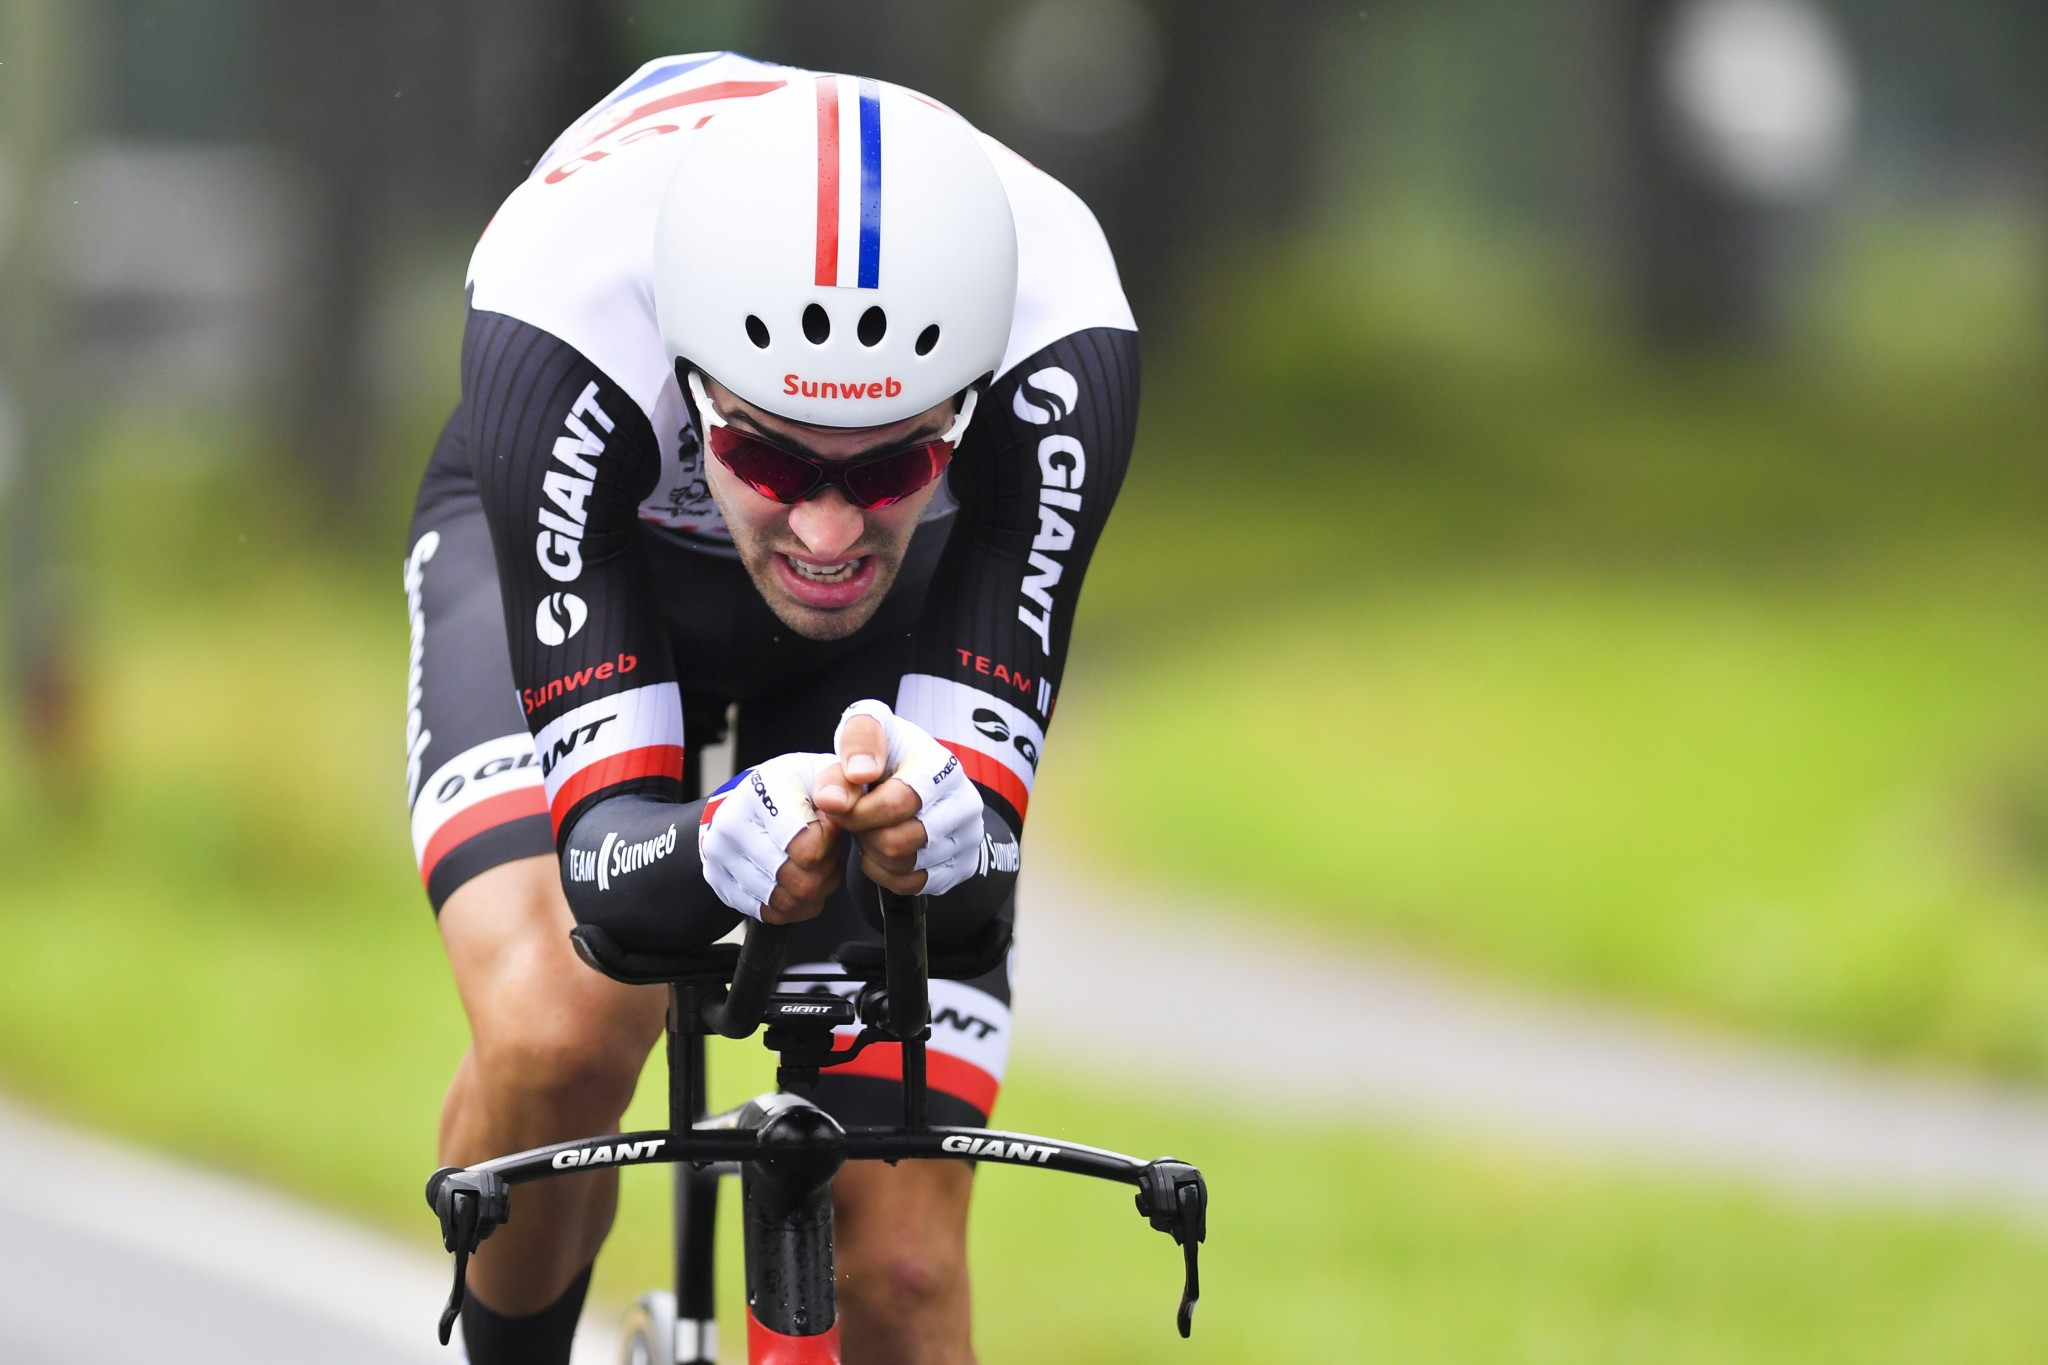 Tom Dumoulin moved up to third place in the general classification ©Getty Images